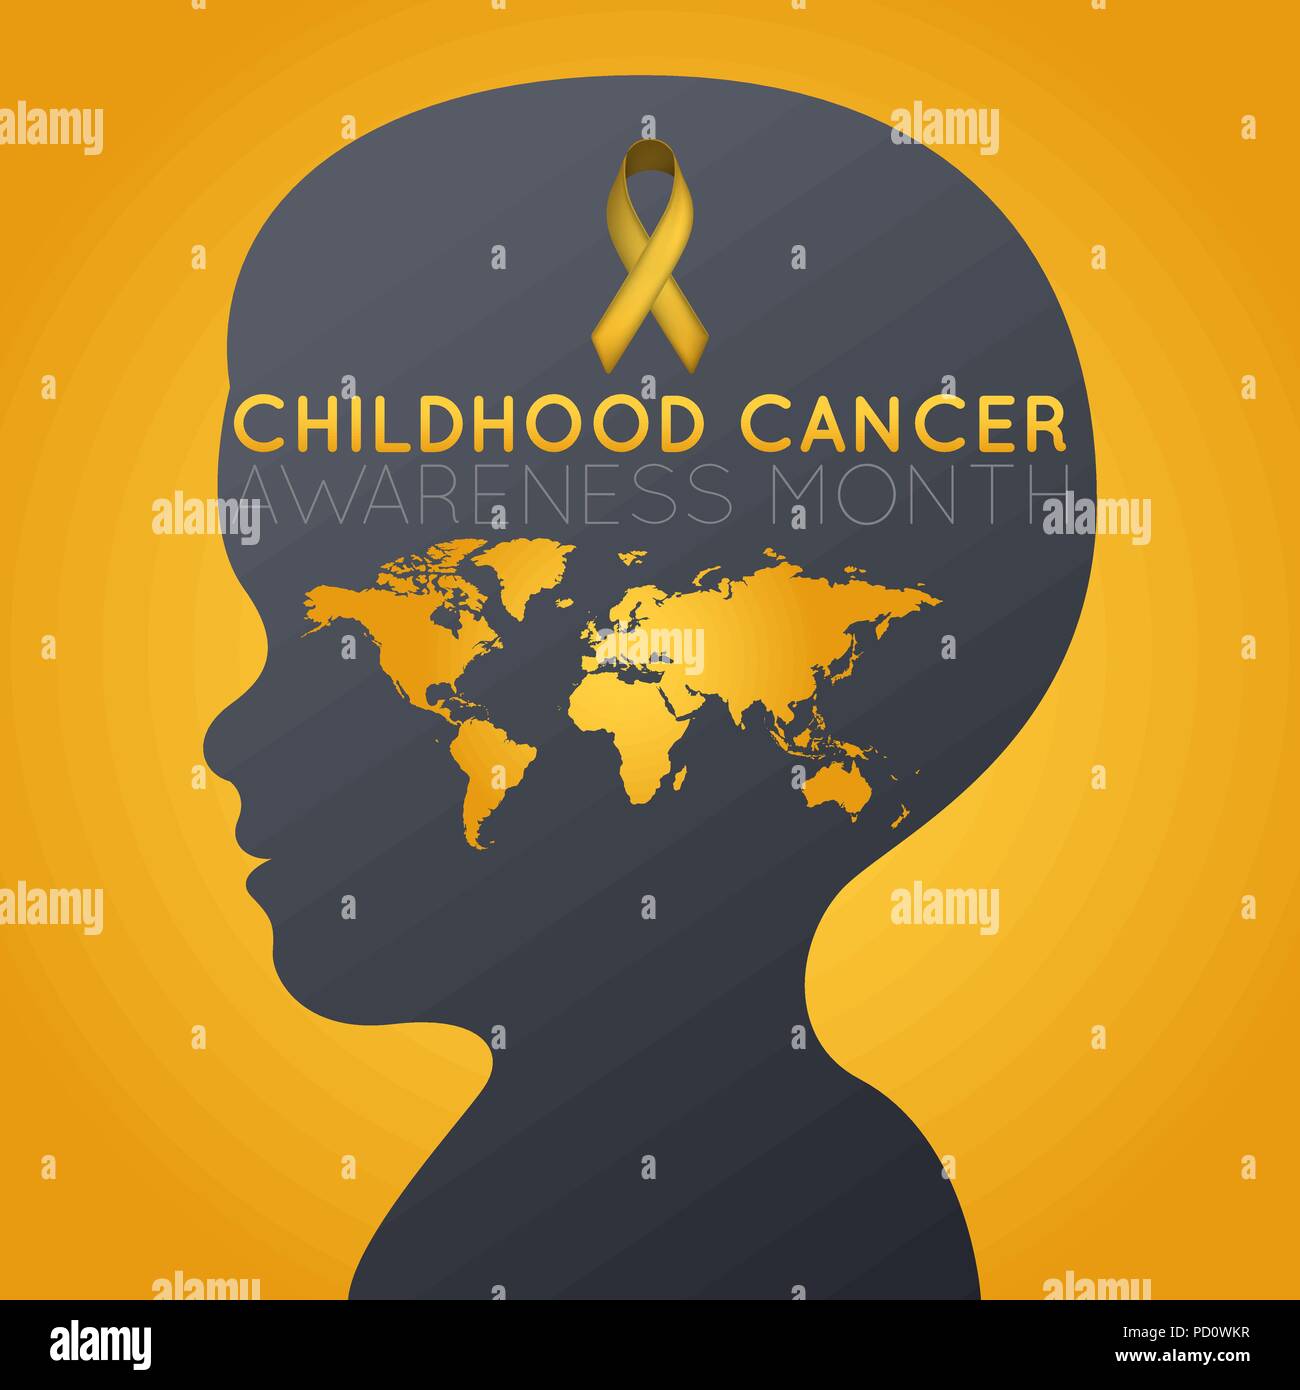 Childhood Cancer Awareness Month vector logo icon illustration Stock Vector